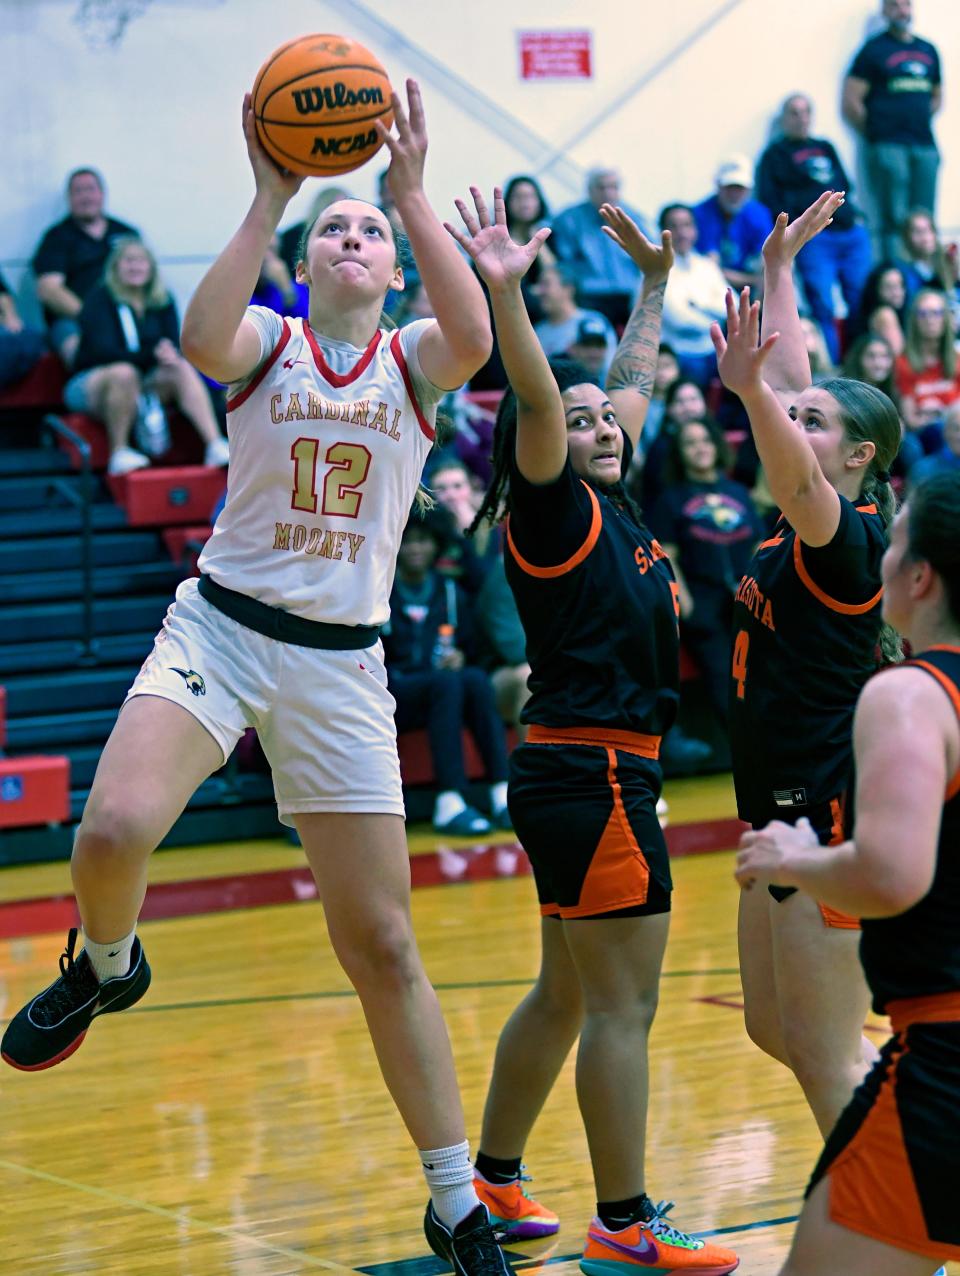 Cardinal Mooney Catholic's Madi Mignery (12) a small forward (SF) and guard (G) scores an easy two points during the 2nd period of play against the Sarasota Sailors Friday night at Mooney's at JM Patterson Pavilion in Sarasota.